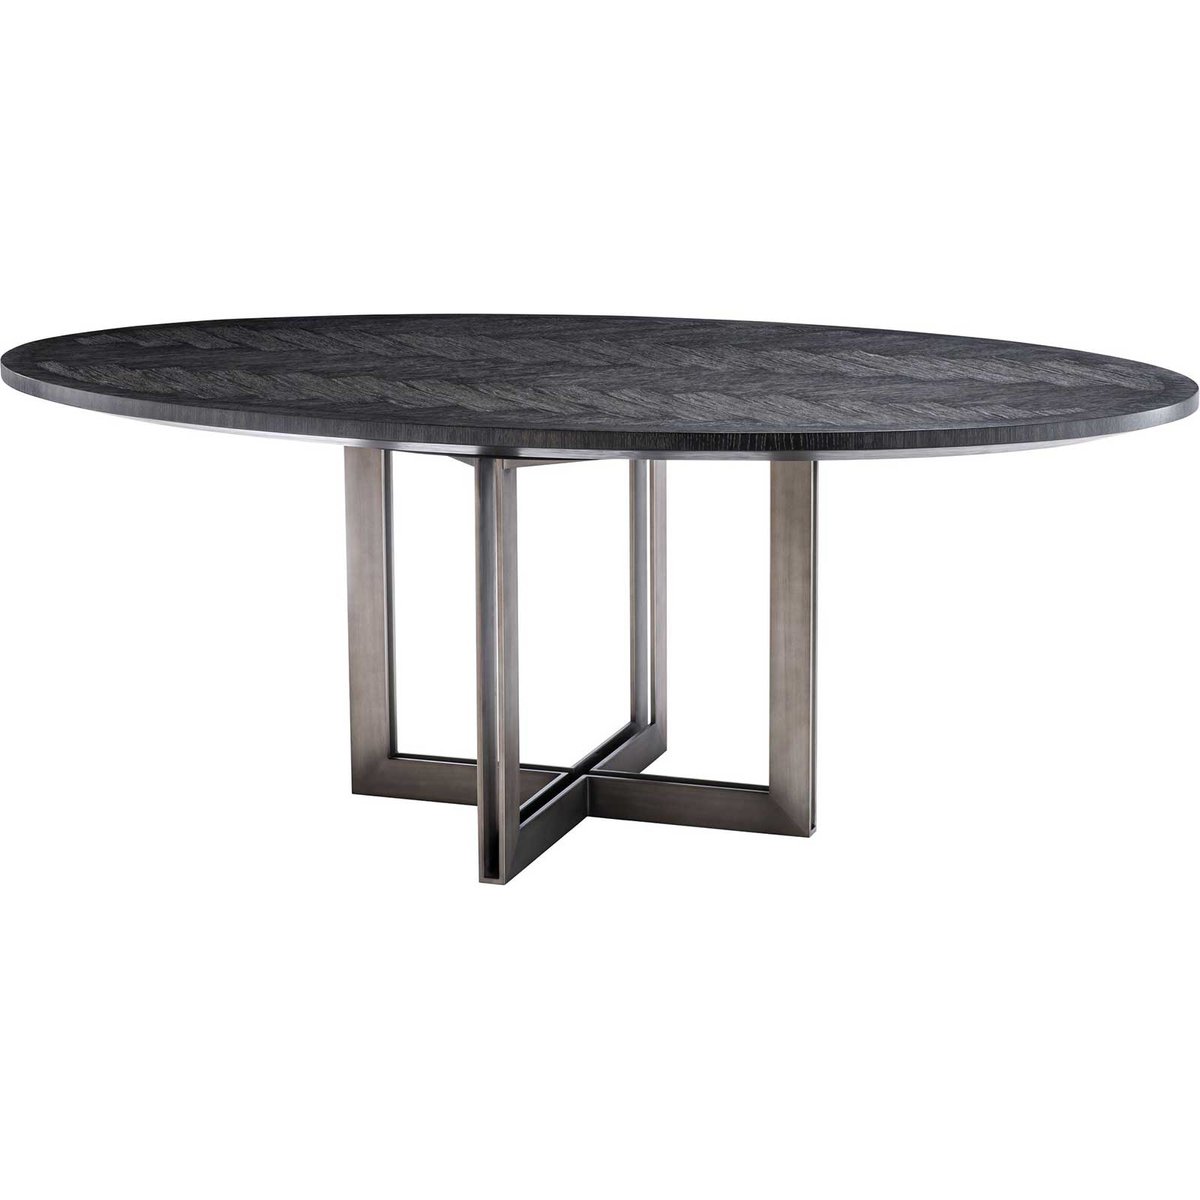 Melchior Oval Dining Table, Charcoal Oak